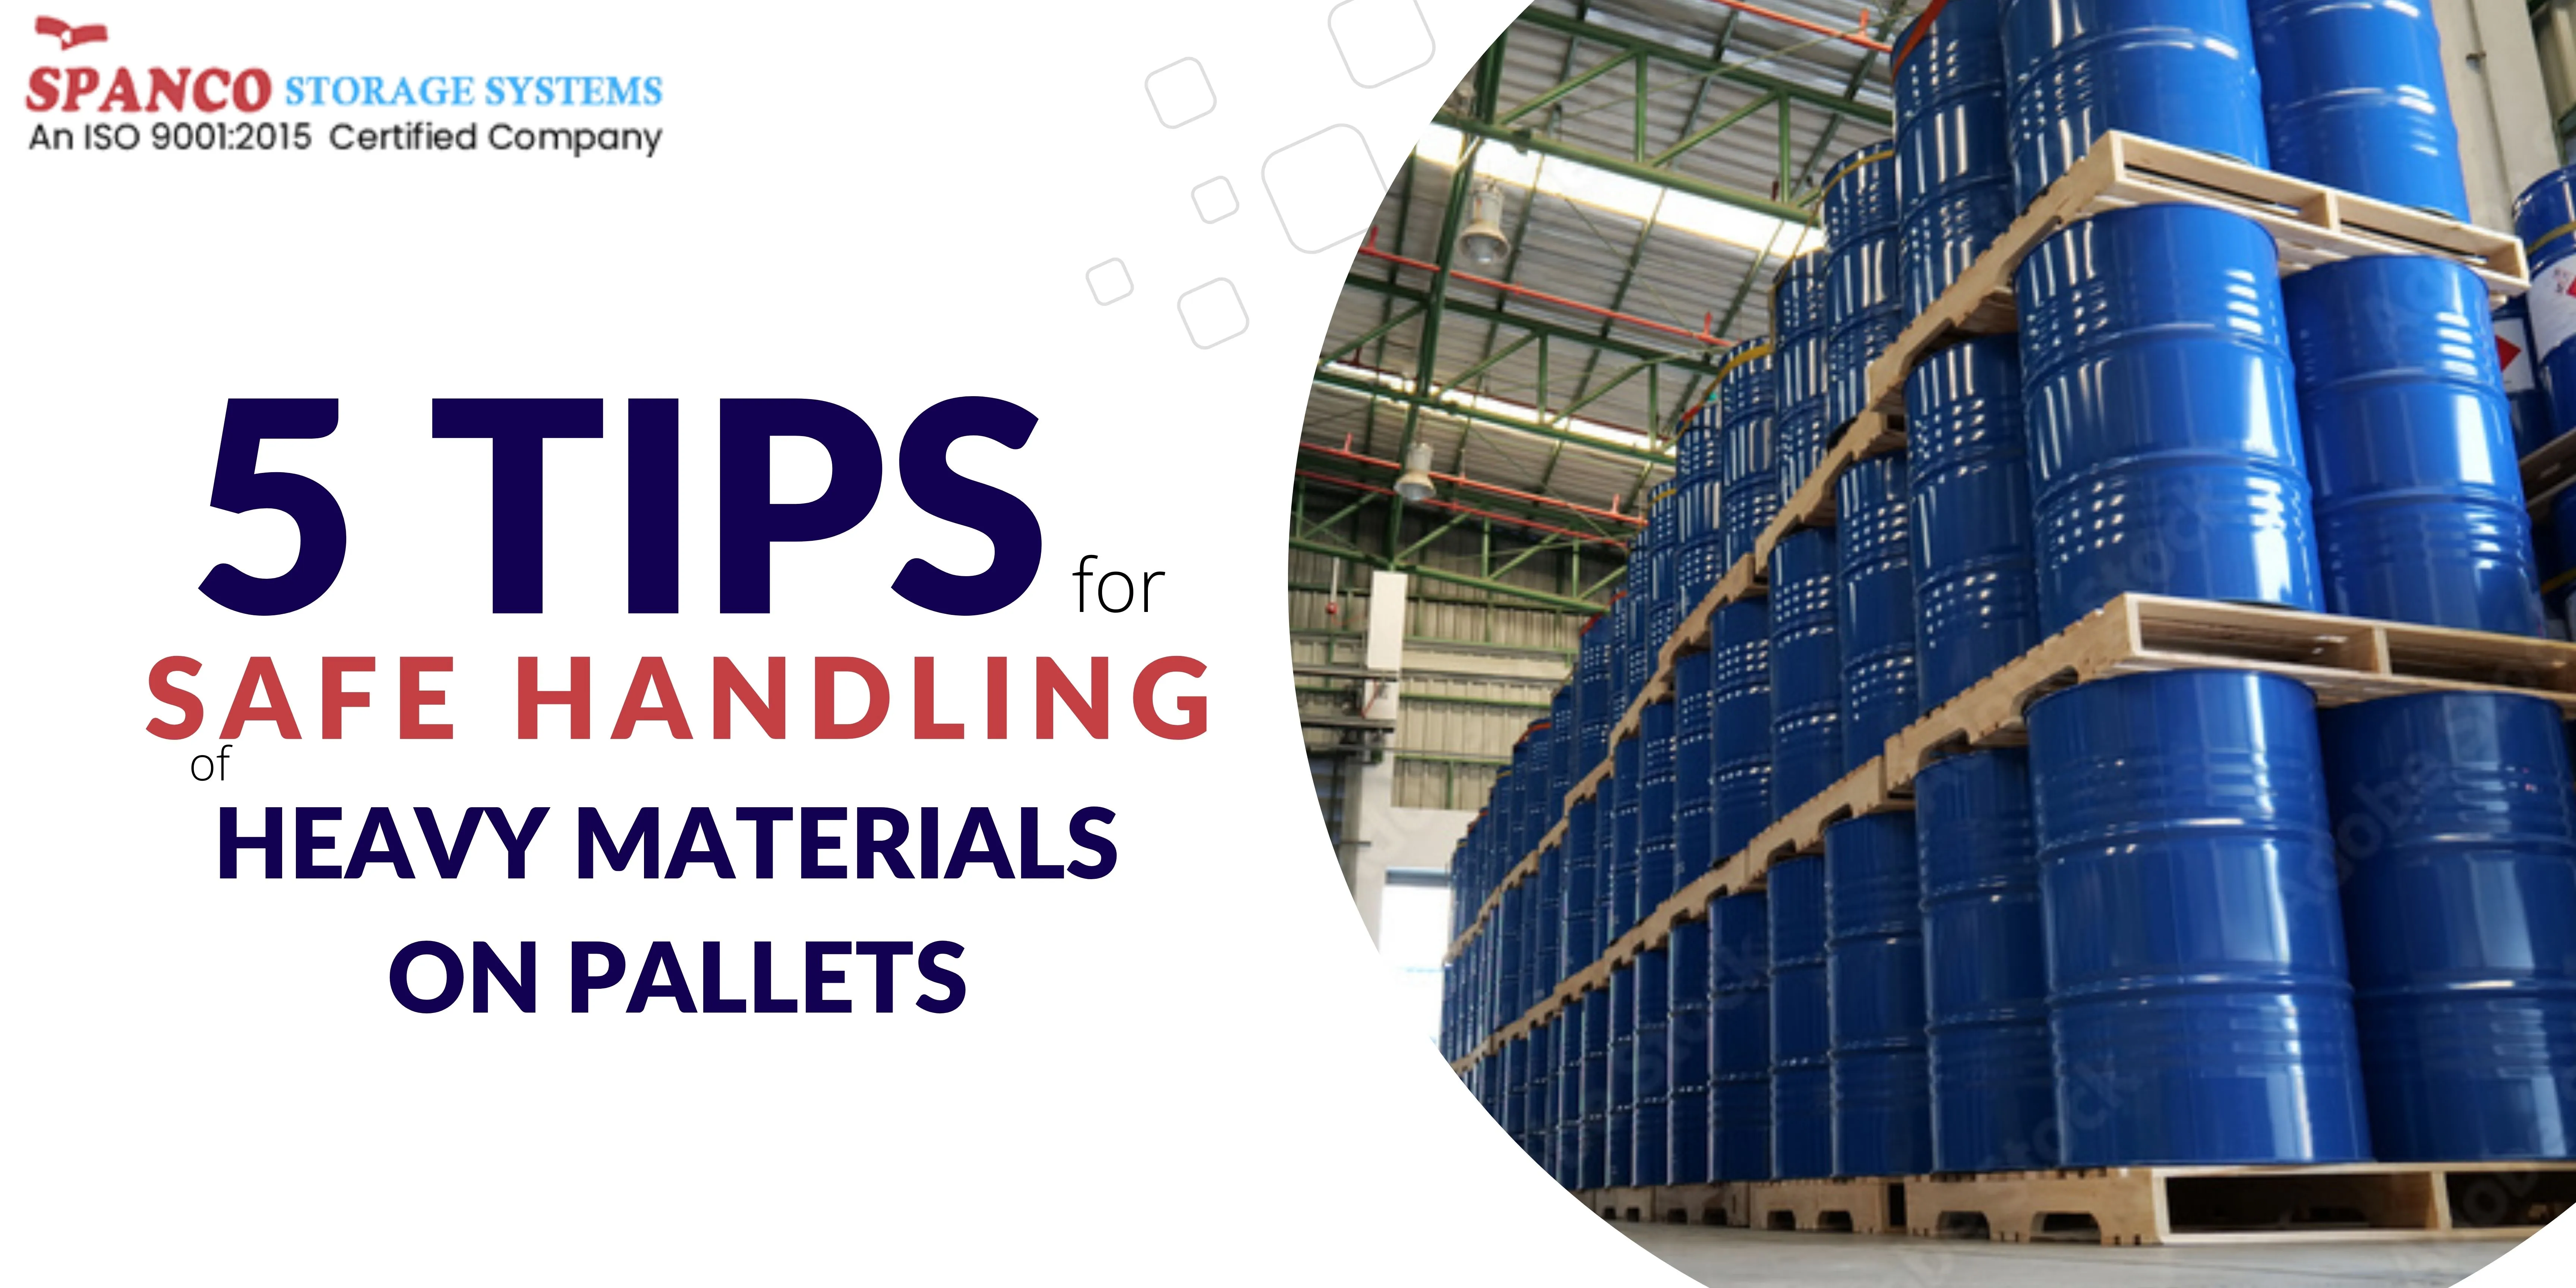 Top 5 Tips for Safe Handling of Heavy Materials on Pallets